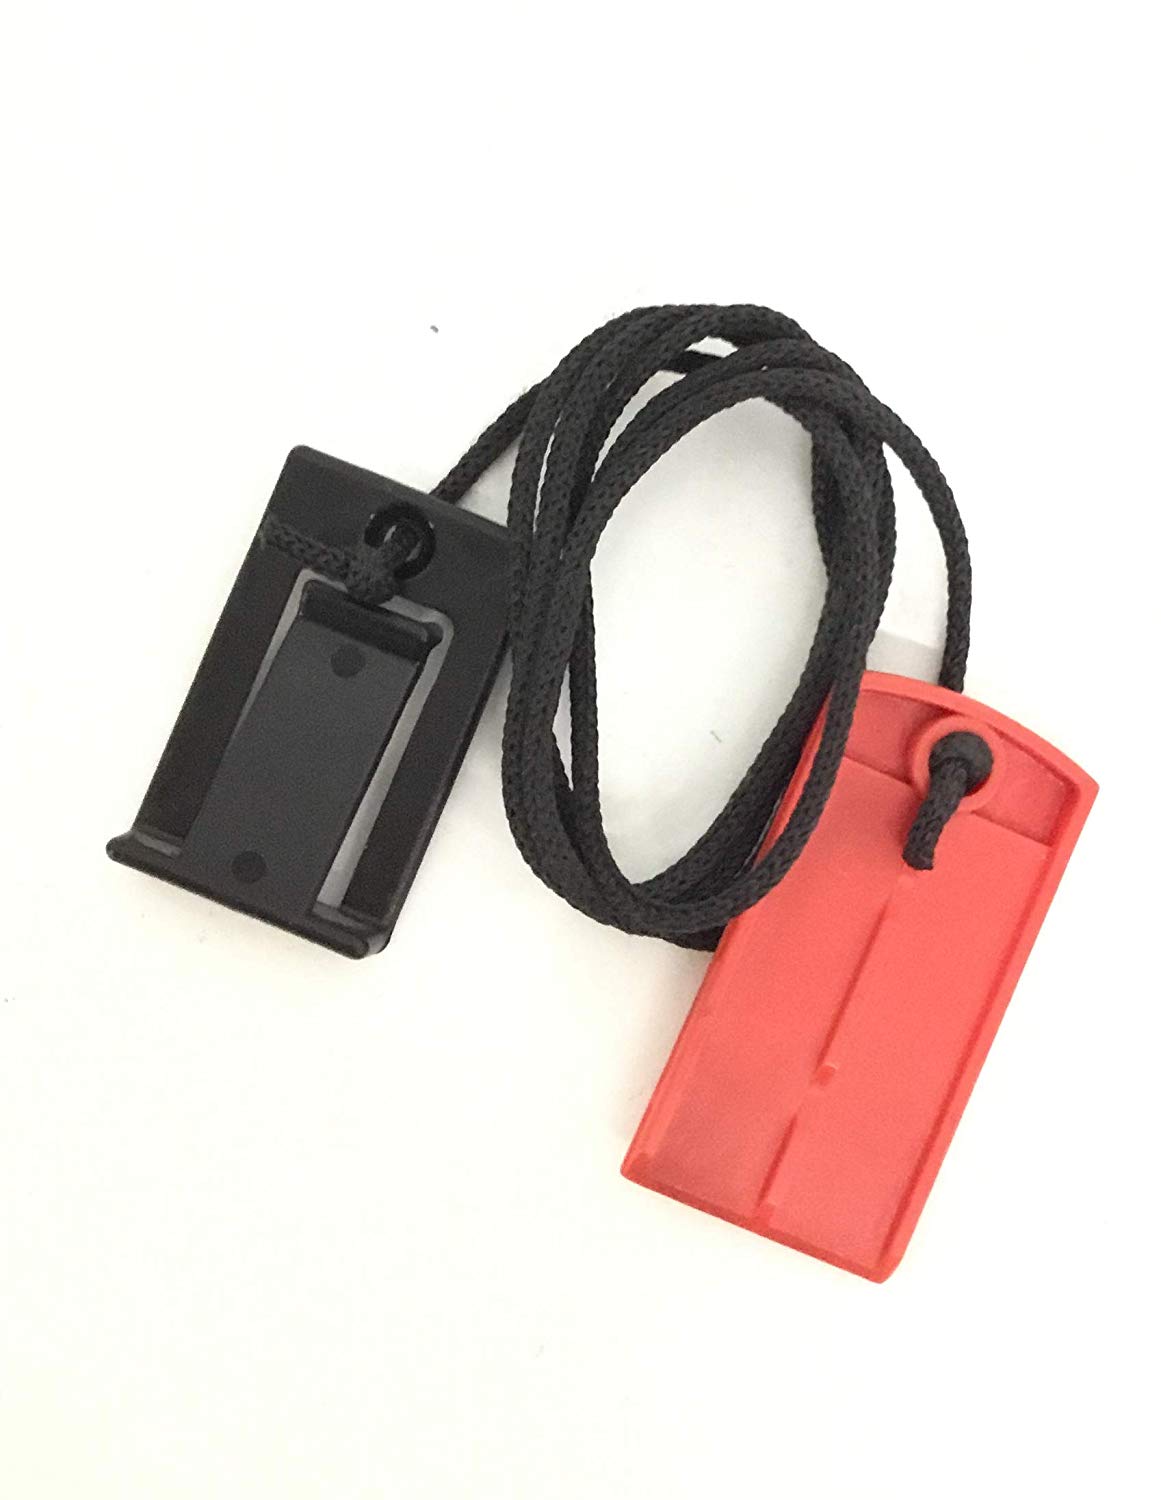 Details about   Weslo 330i Treadmill Safety Key 